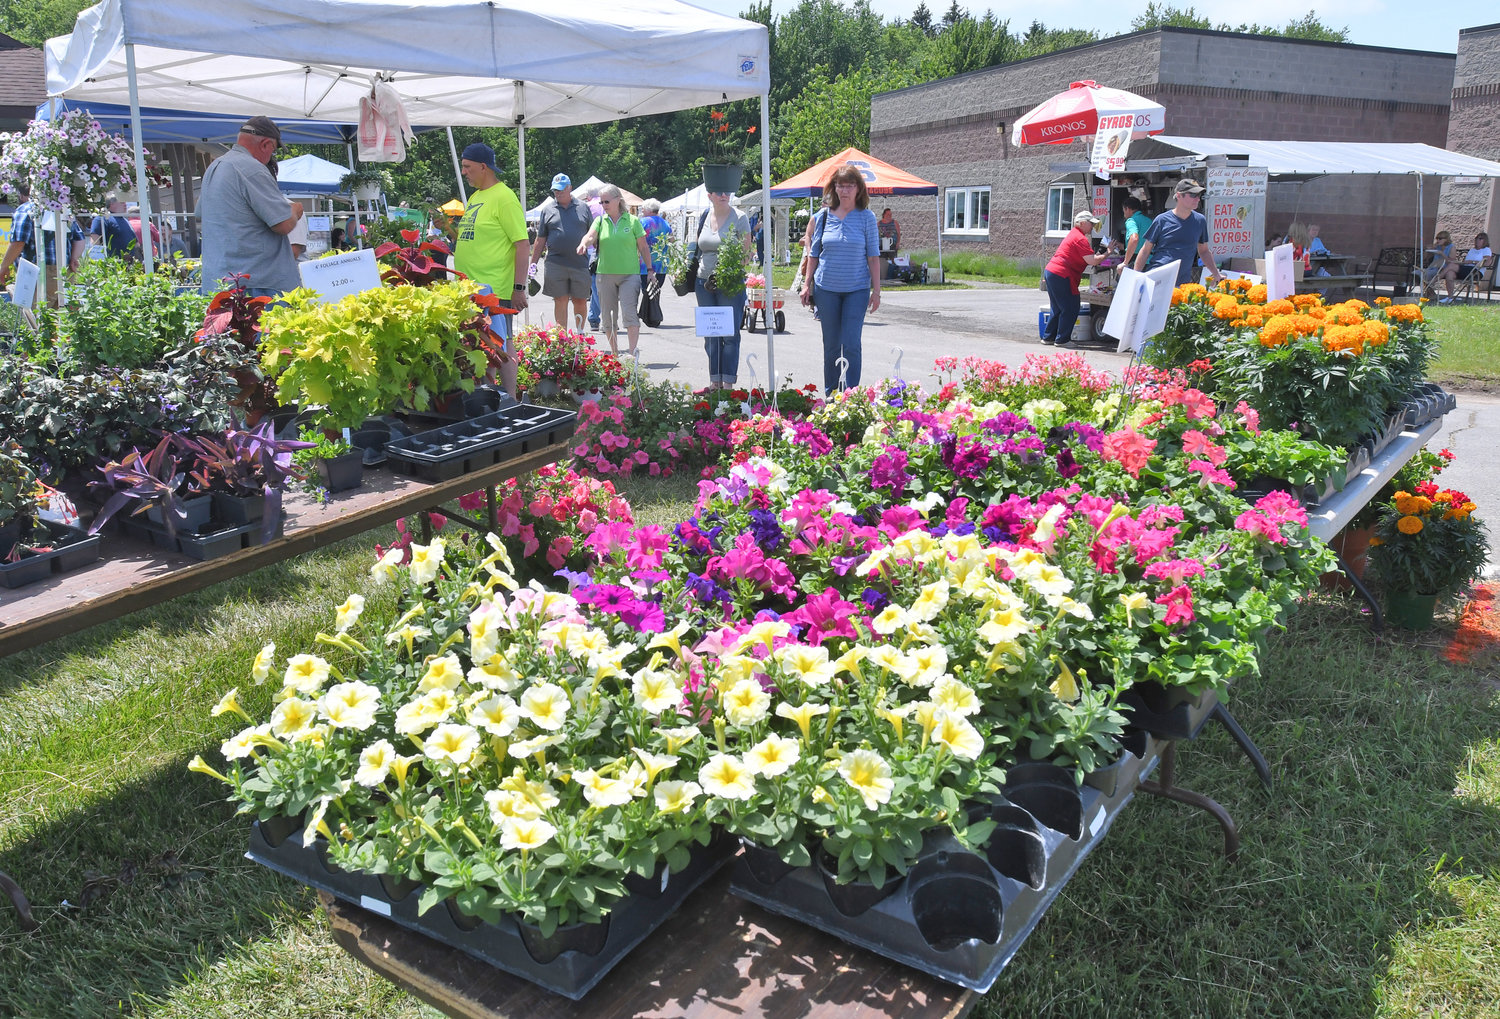 Flowers for sale at a previous Herb & Flower Festival at Cornell Cooperative Extension.